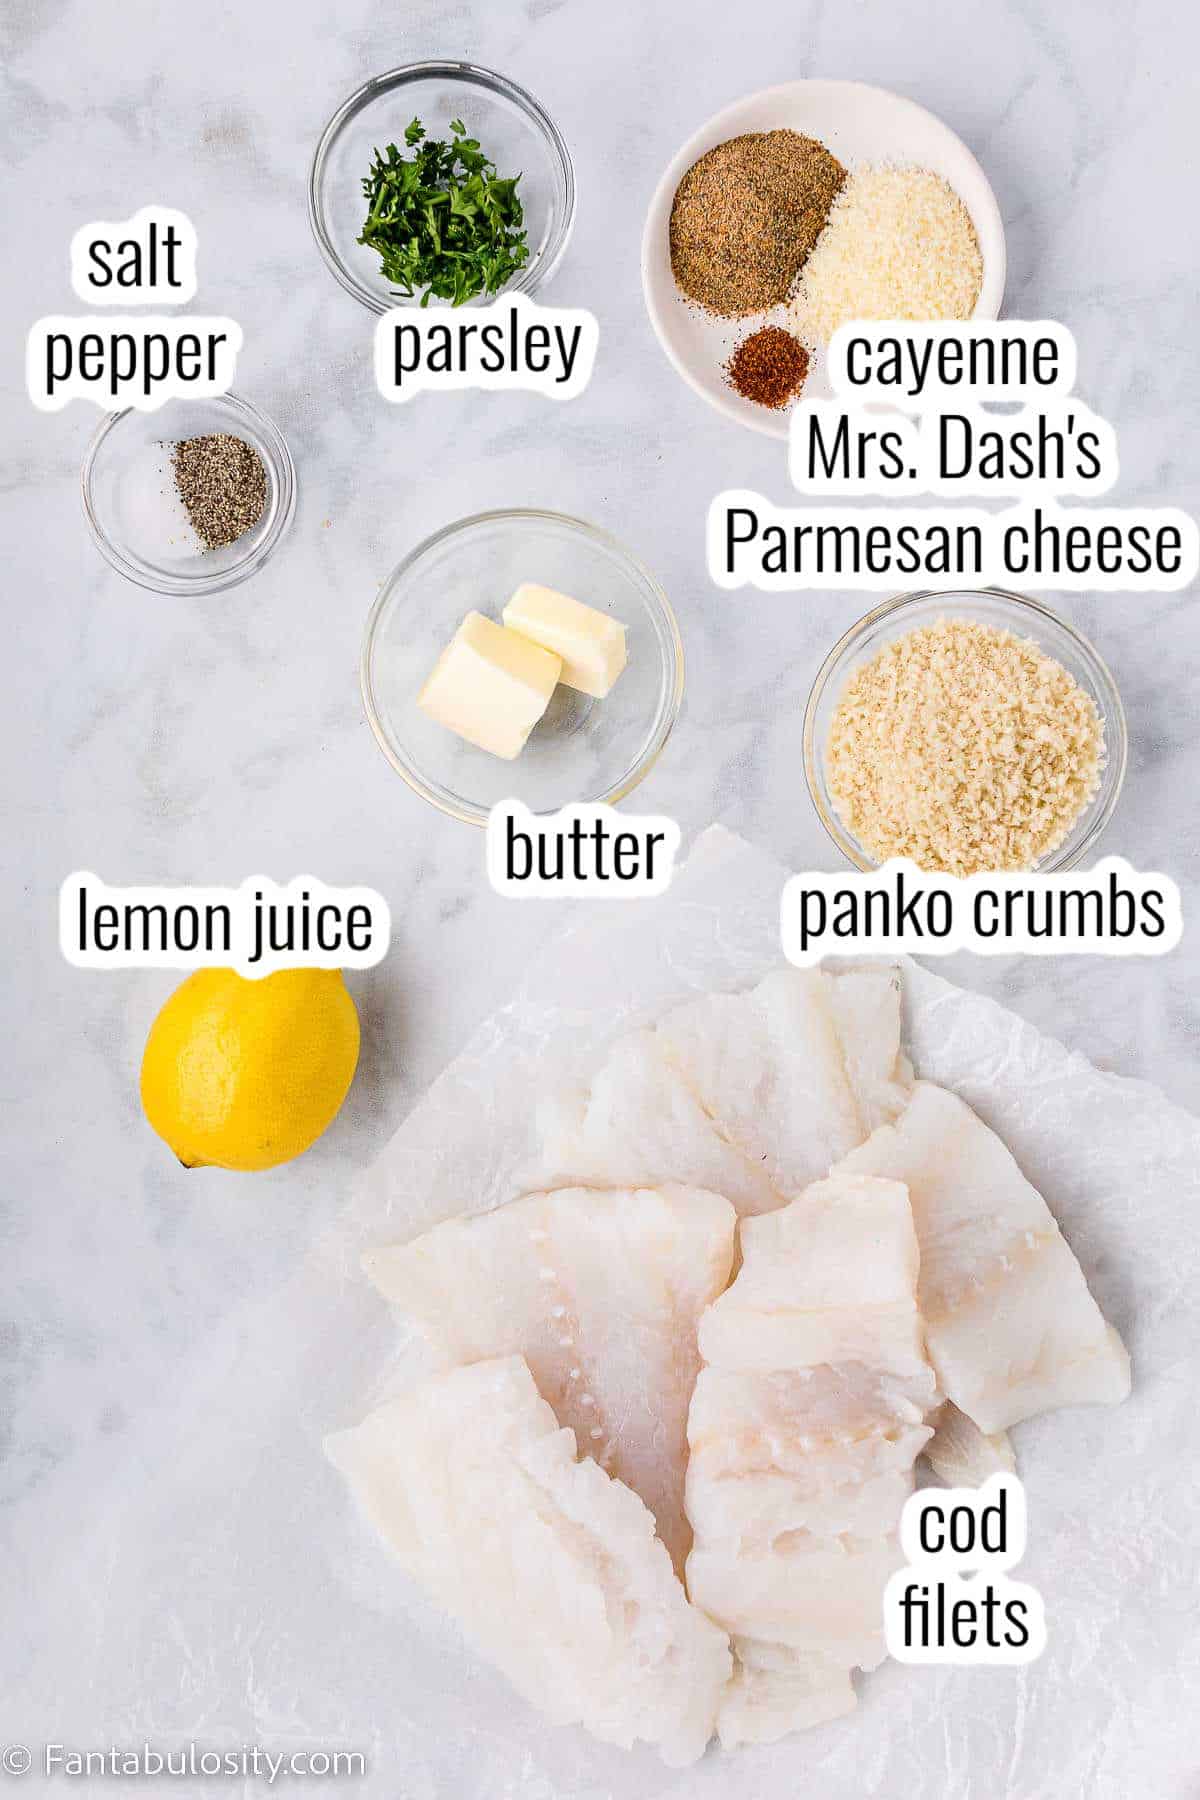 Labeled ingredients for panko crusted cod.